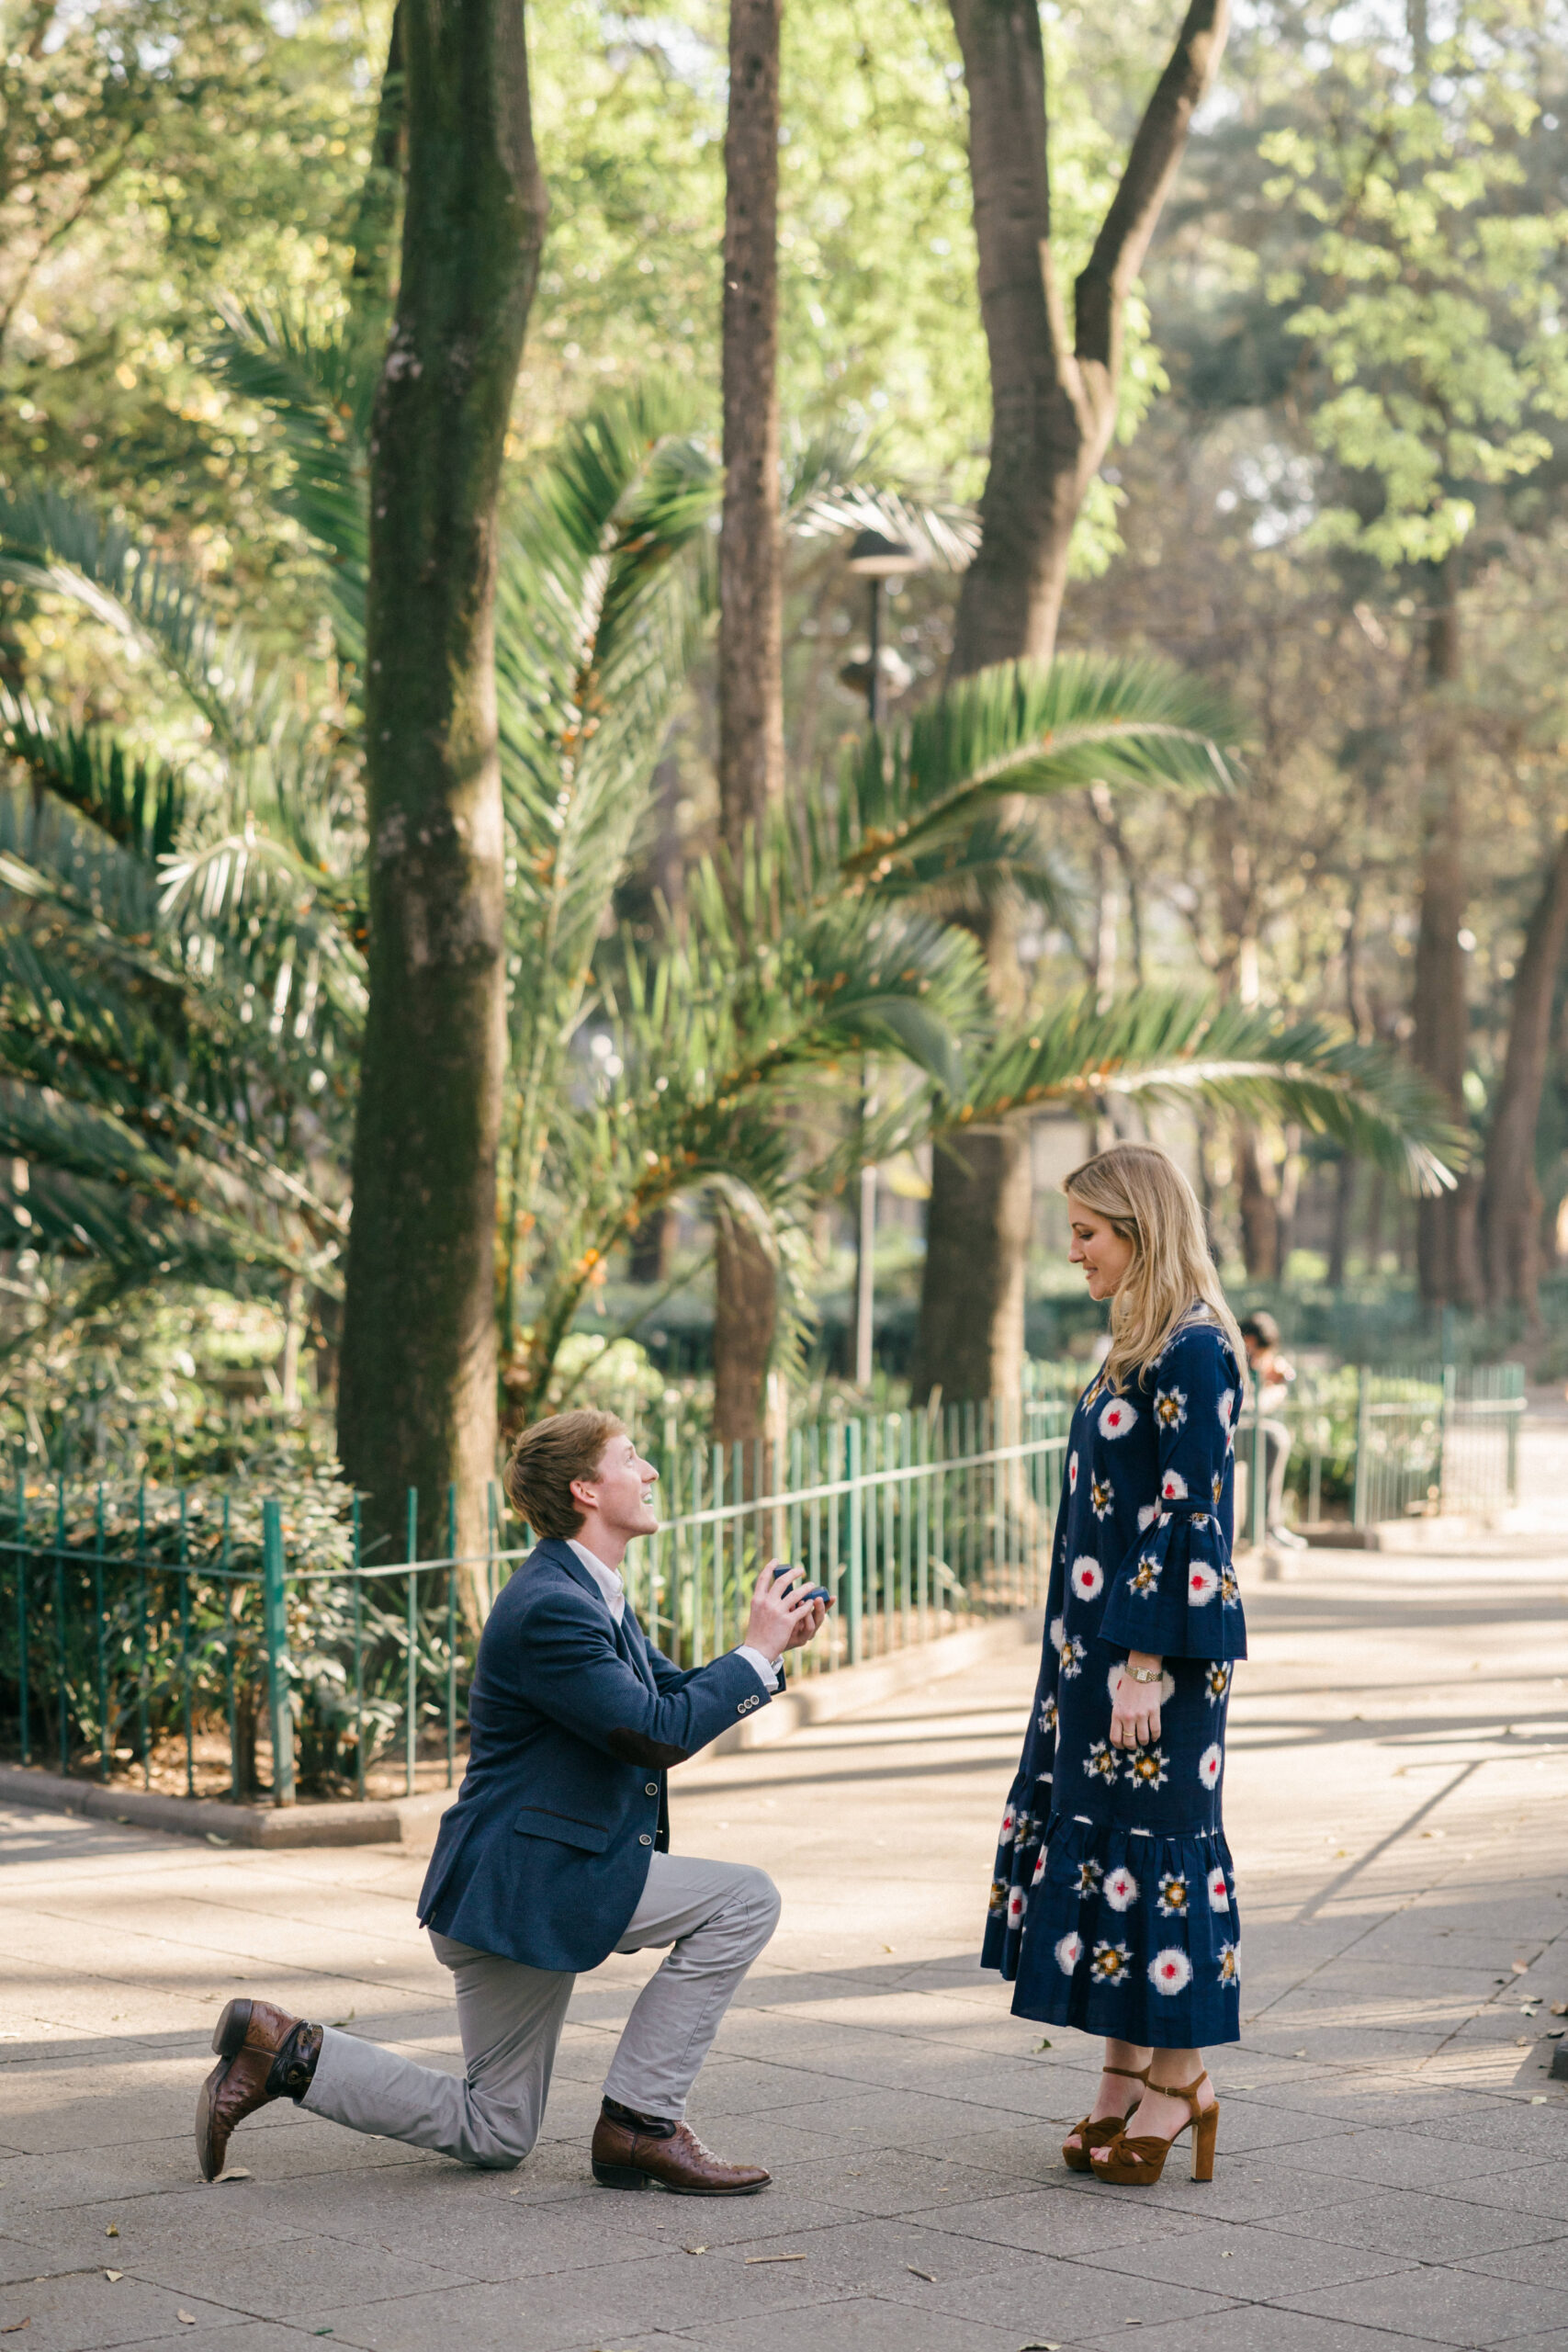 Man on bended knee asking his fiancee for her hand in marriage during their dreamy surprise Mexico city proposal